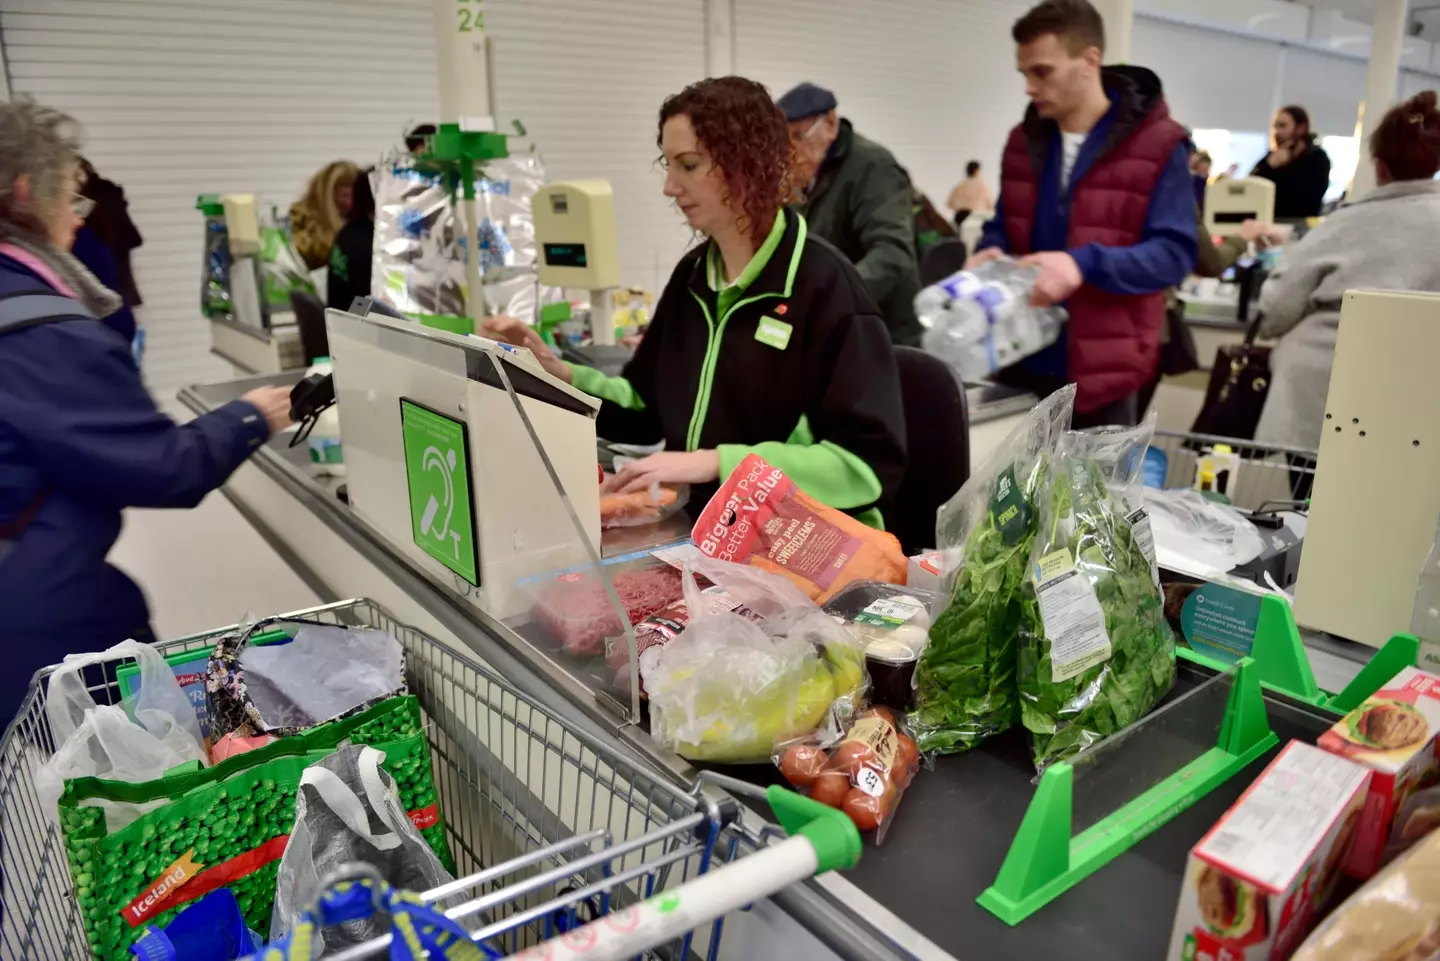 Asda shoppers are reportedly stopping staff from scanning their items half-way through checkout because they can't afford more.